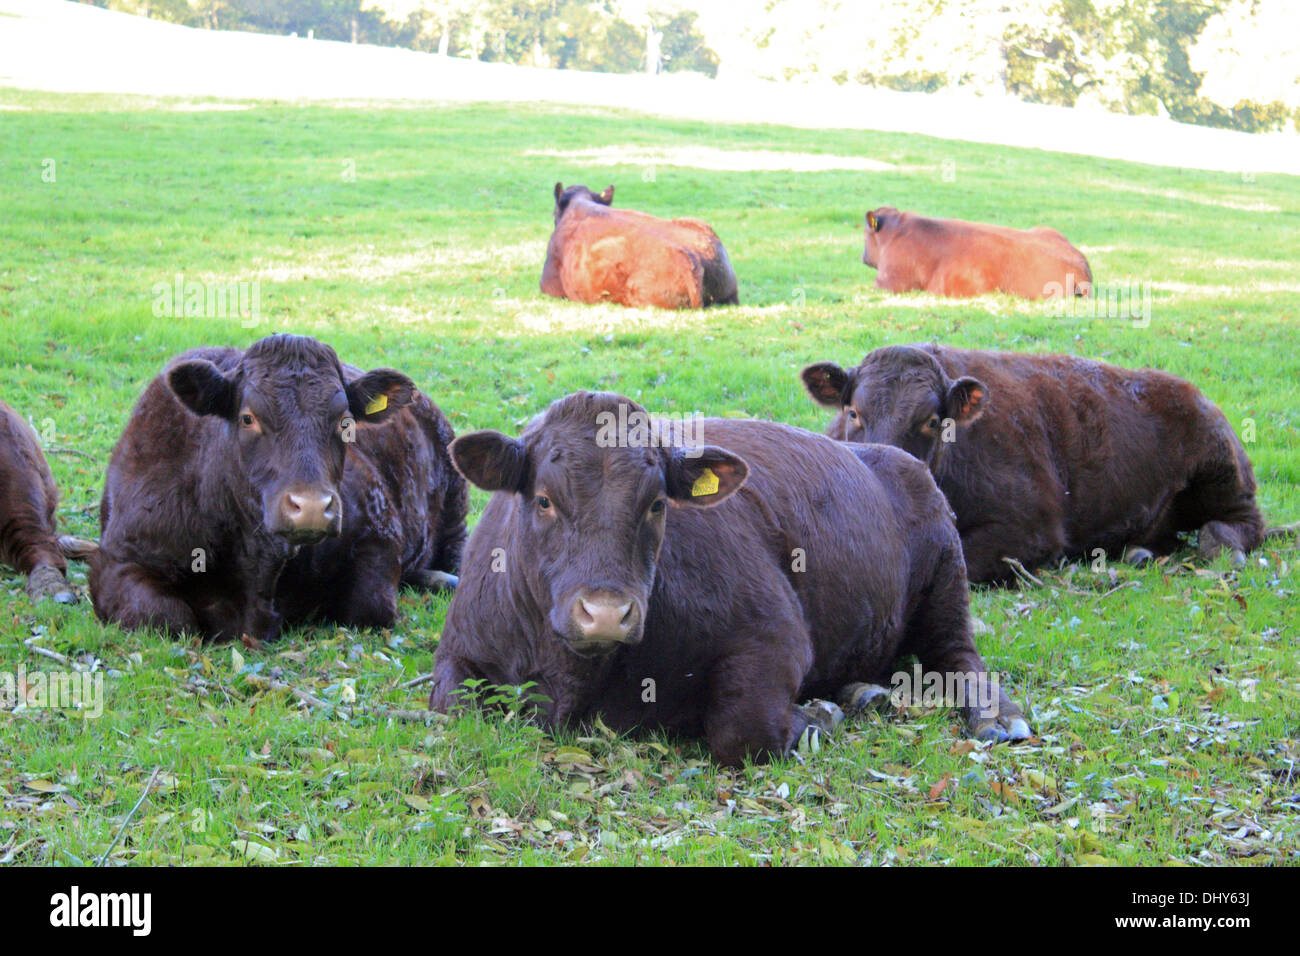 Black cows laying down in a field, Runnymede Surrey England Stock Photo